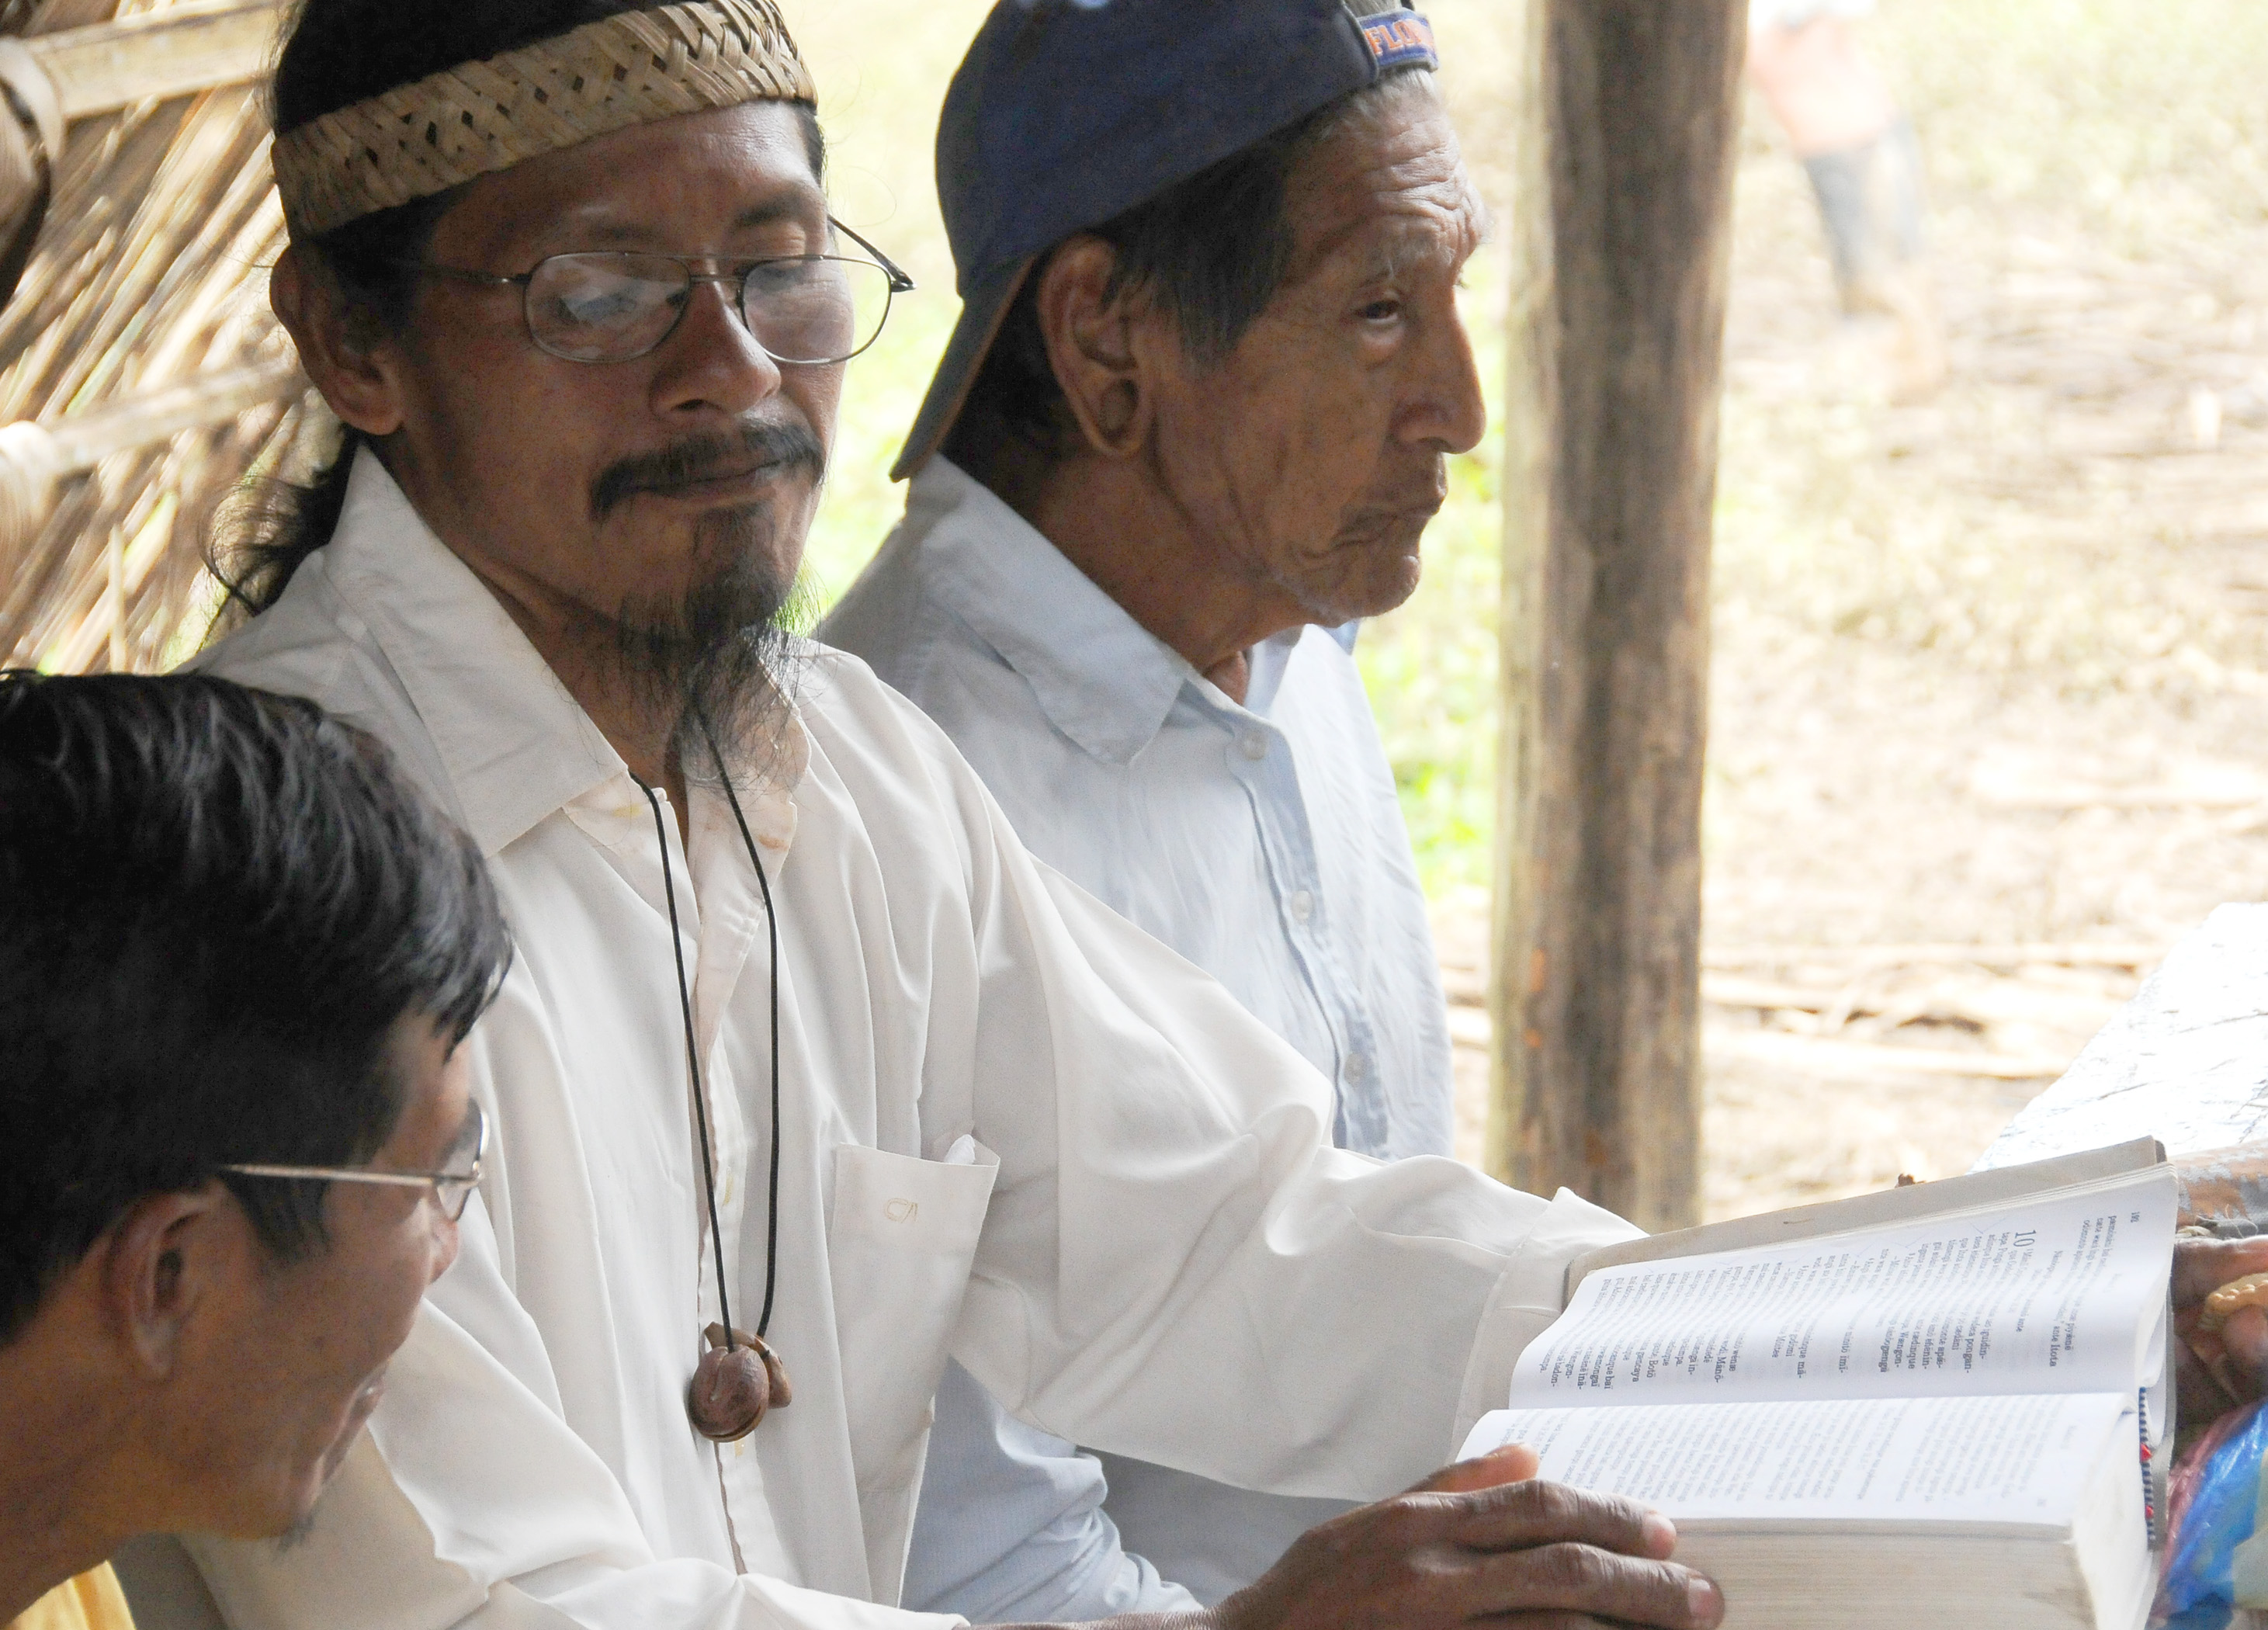 Kawia (with open Bible) sits between Menkaye (on his left) and another person. Kawia and Menkaye are literate, and both are Christians. Photo by Daniel Klassen.